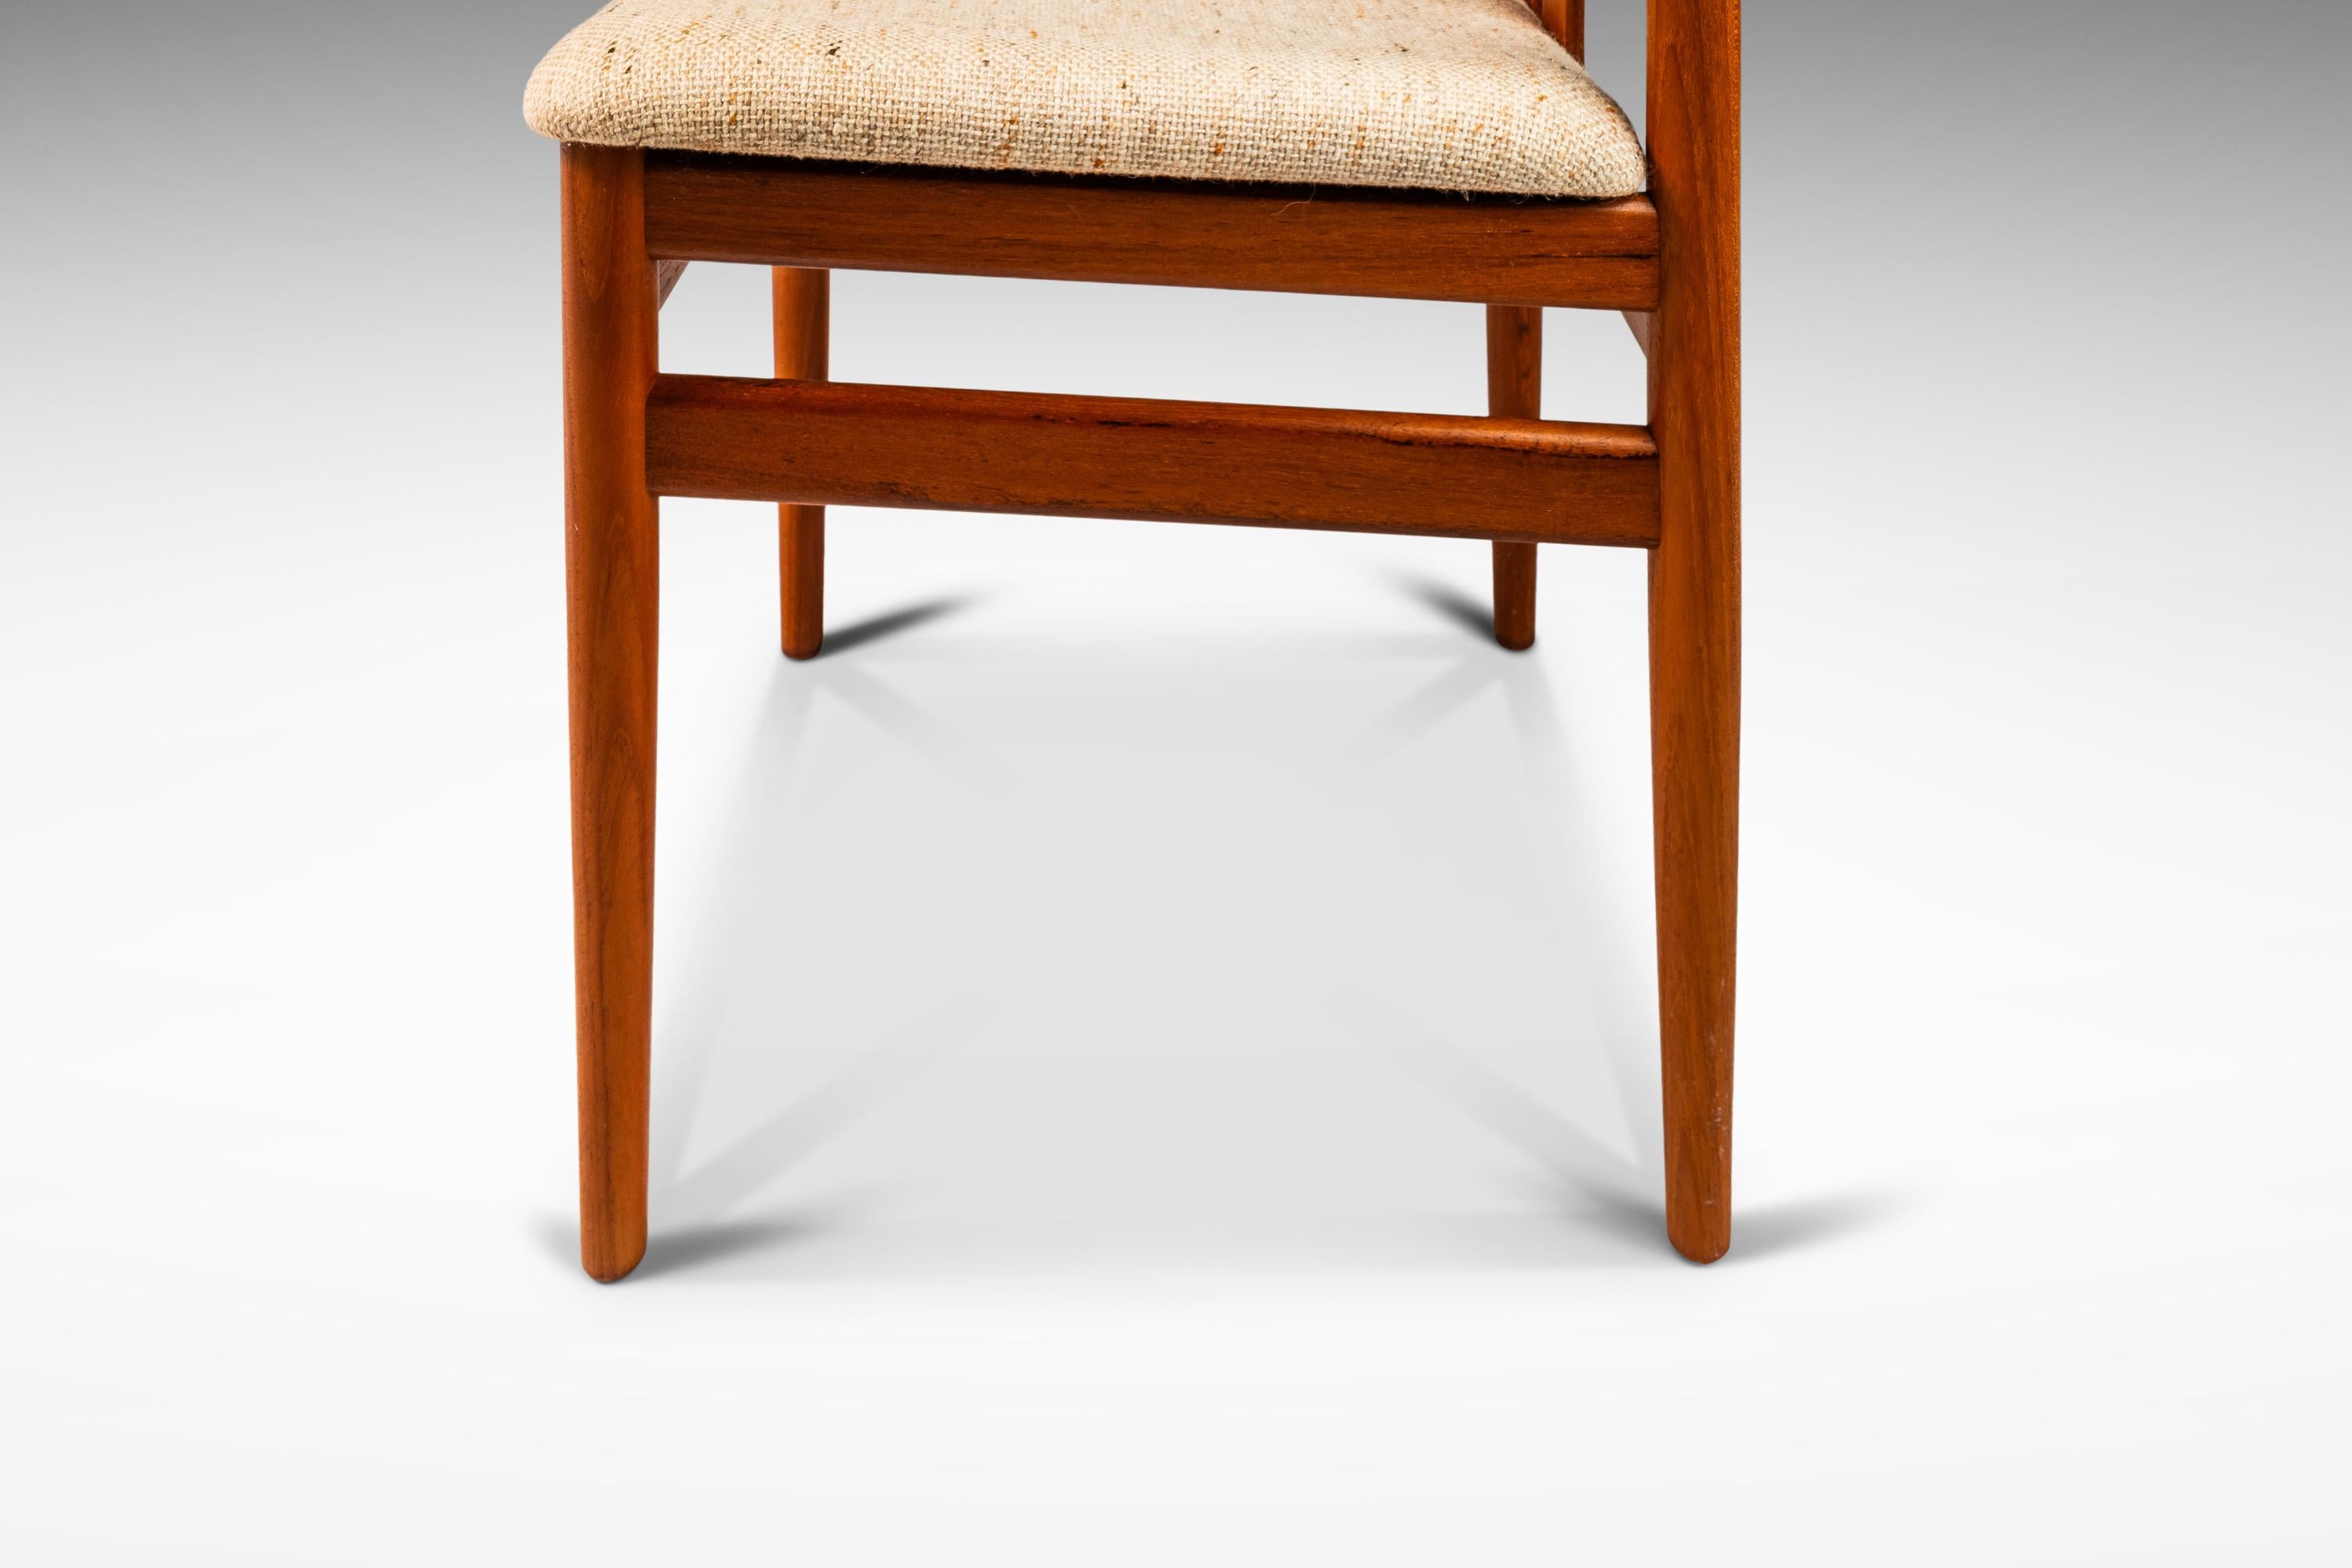 Set of 4 Dining Chairs, Teak & Oatmeal Knit Fabric by Vamdrup Stolefabrik, 1960s For Sale 7